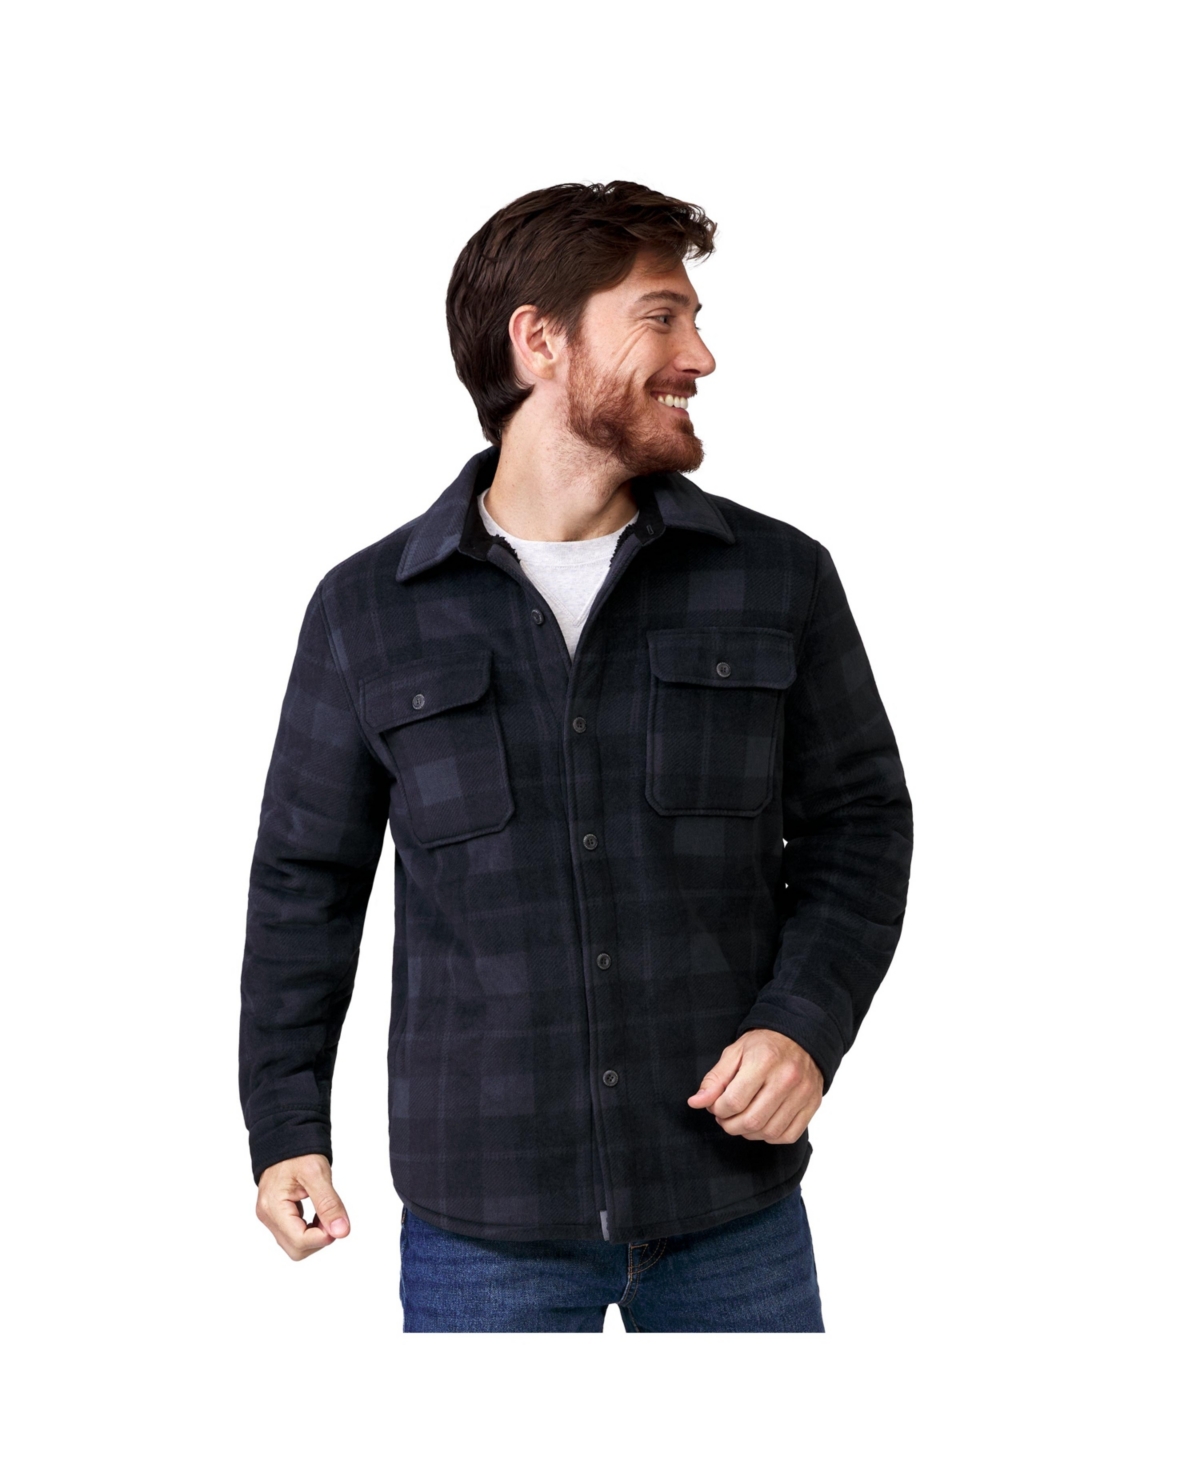 Men's Mountain Ridge Sueded Chill Out Fleece Jacket - Deep charcoal plaid